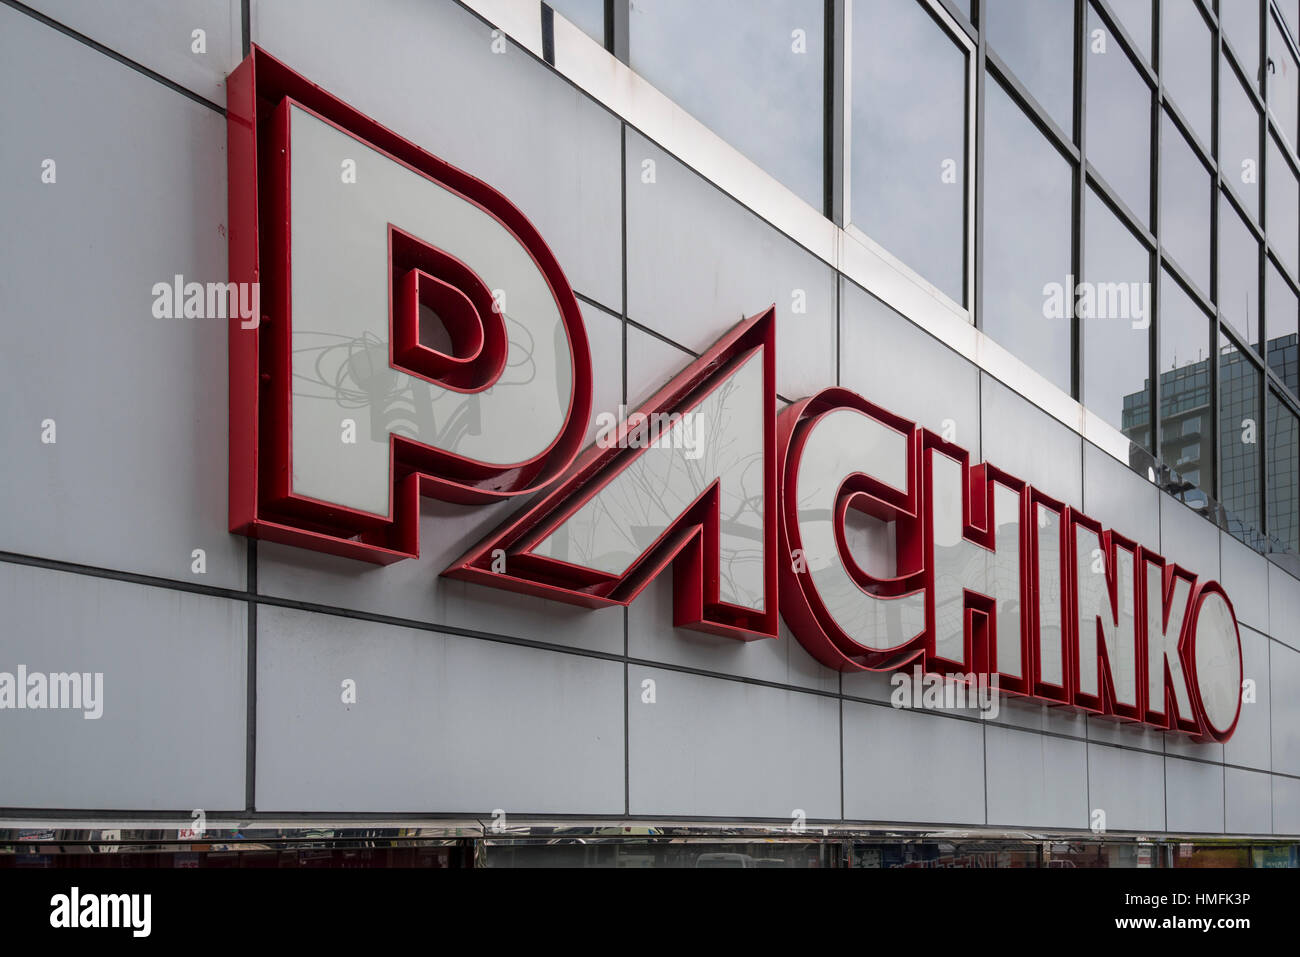 Pachinko sign on a building, Kyoto, Japan Stock Photo